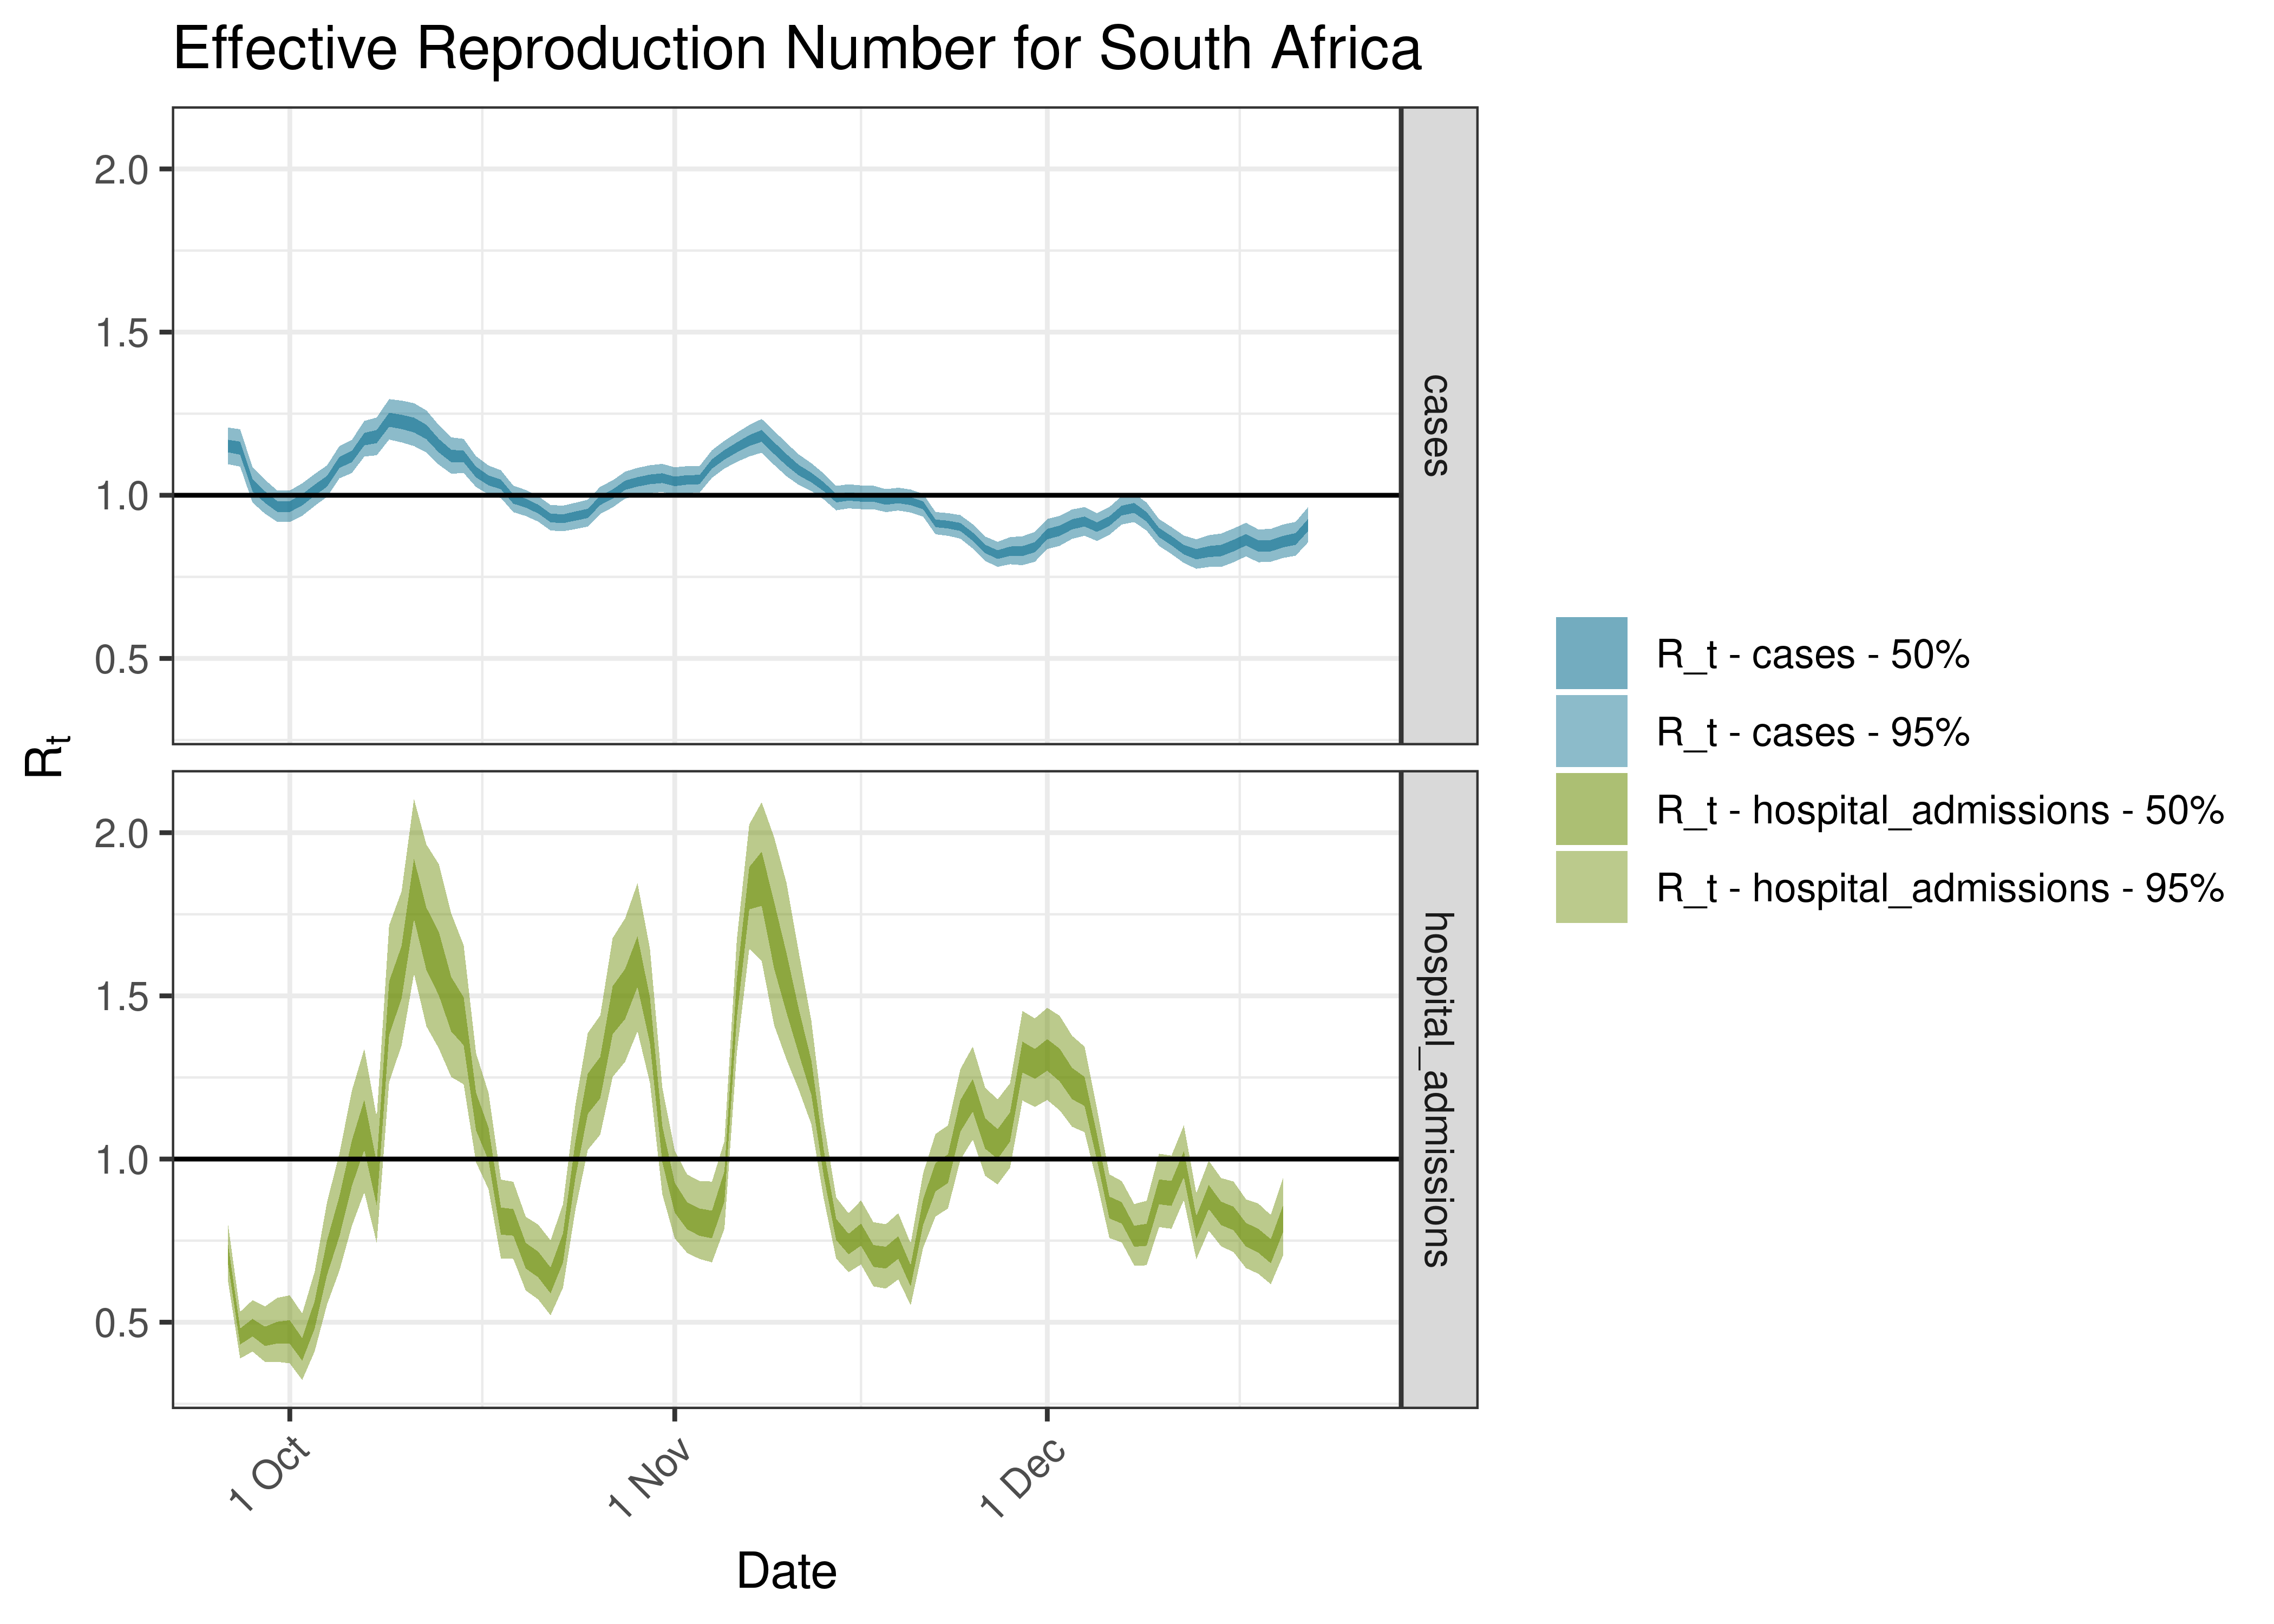 Estimated Effective Reproduction Number for South Africa over last 90 days